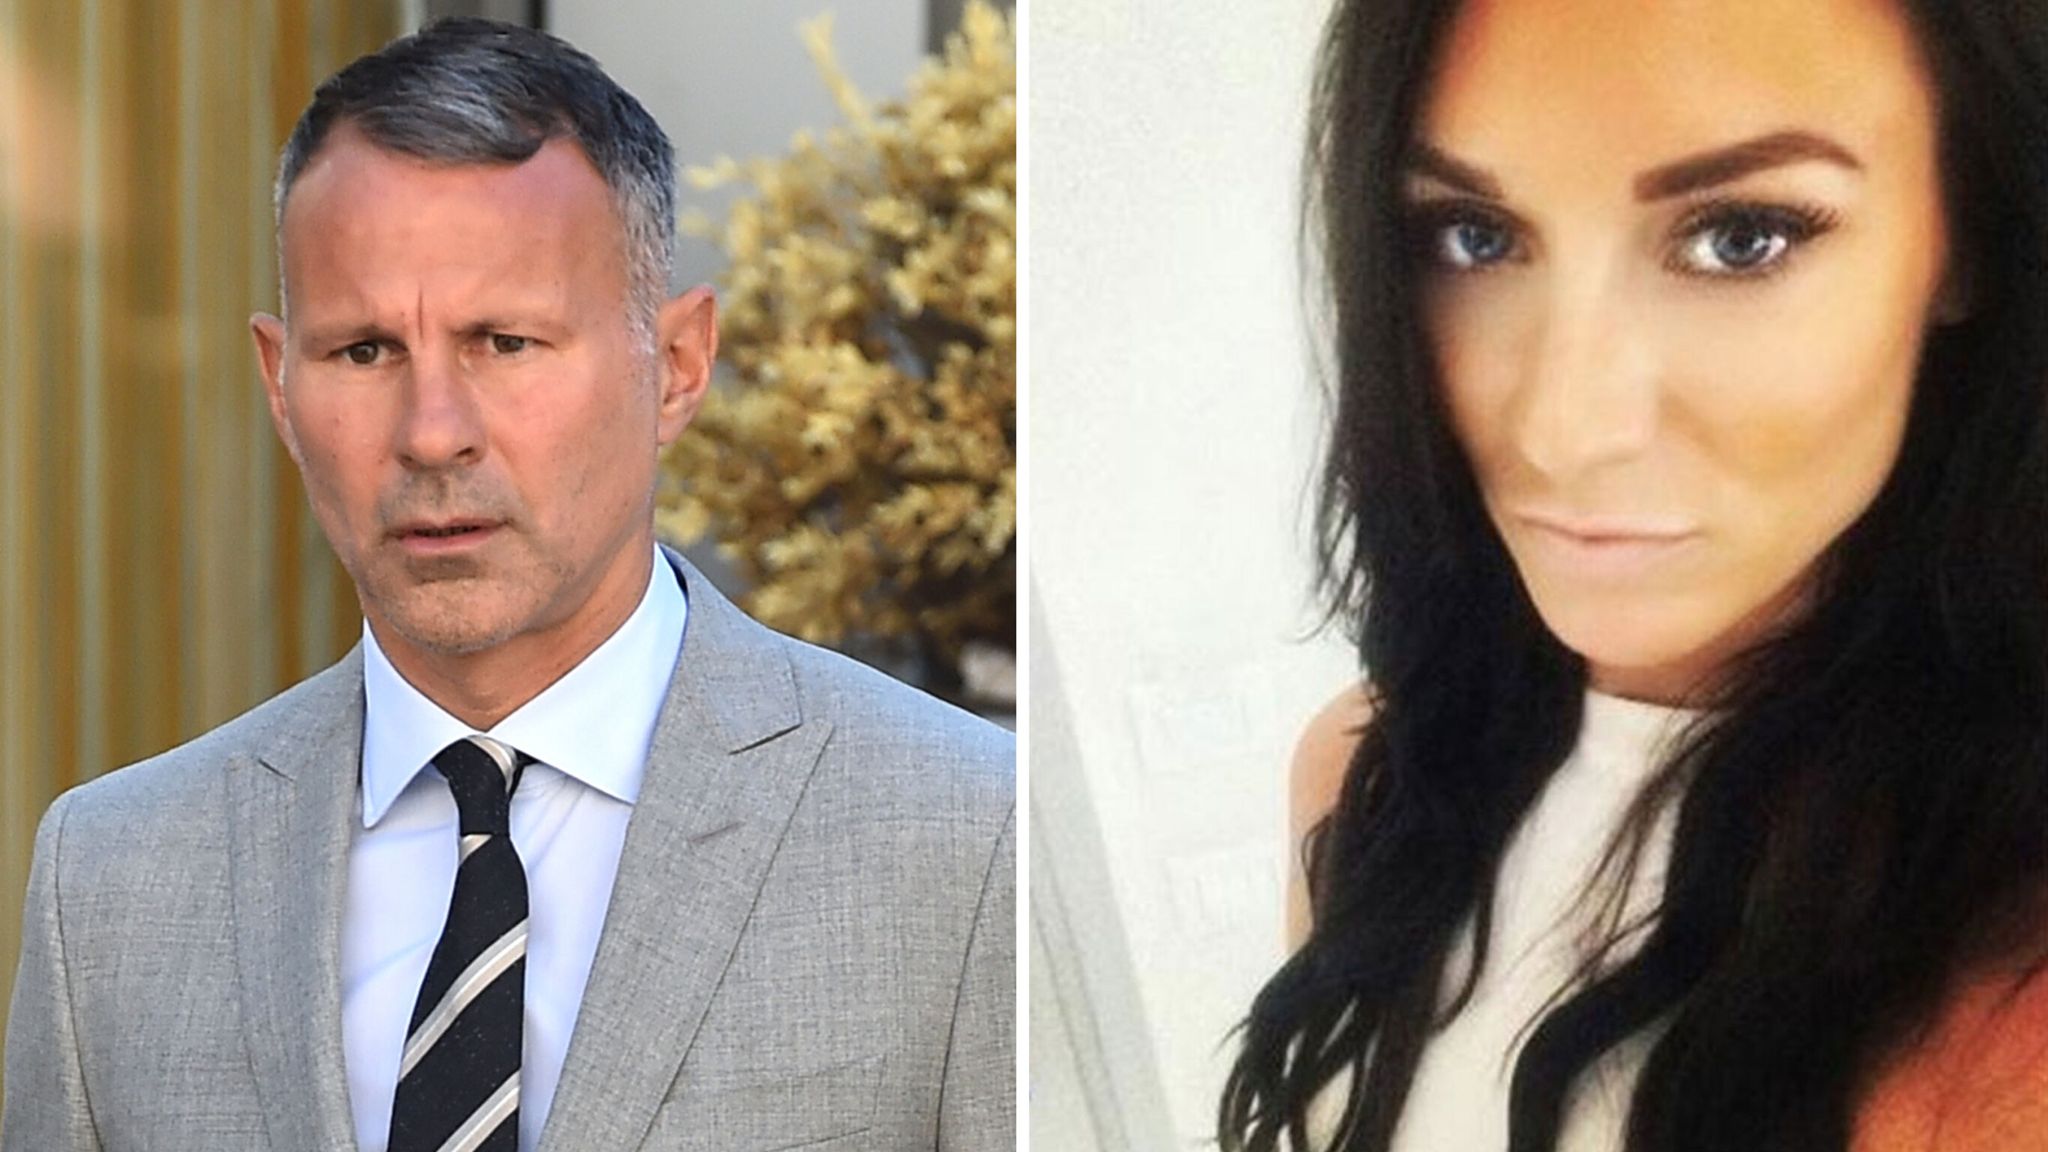 Ryan Giggs Trial Ex Girlfriend Kate Greville Admits Lying To Footballer About Having Cancerous